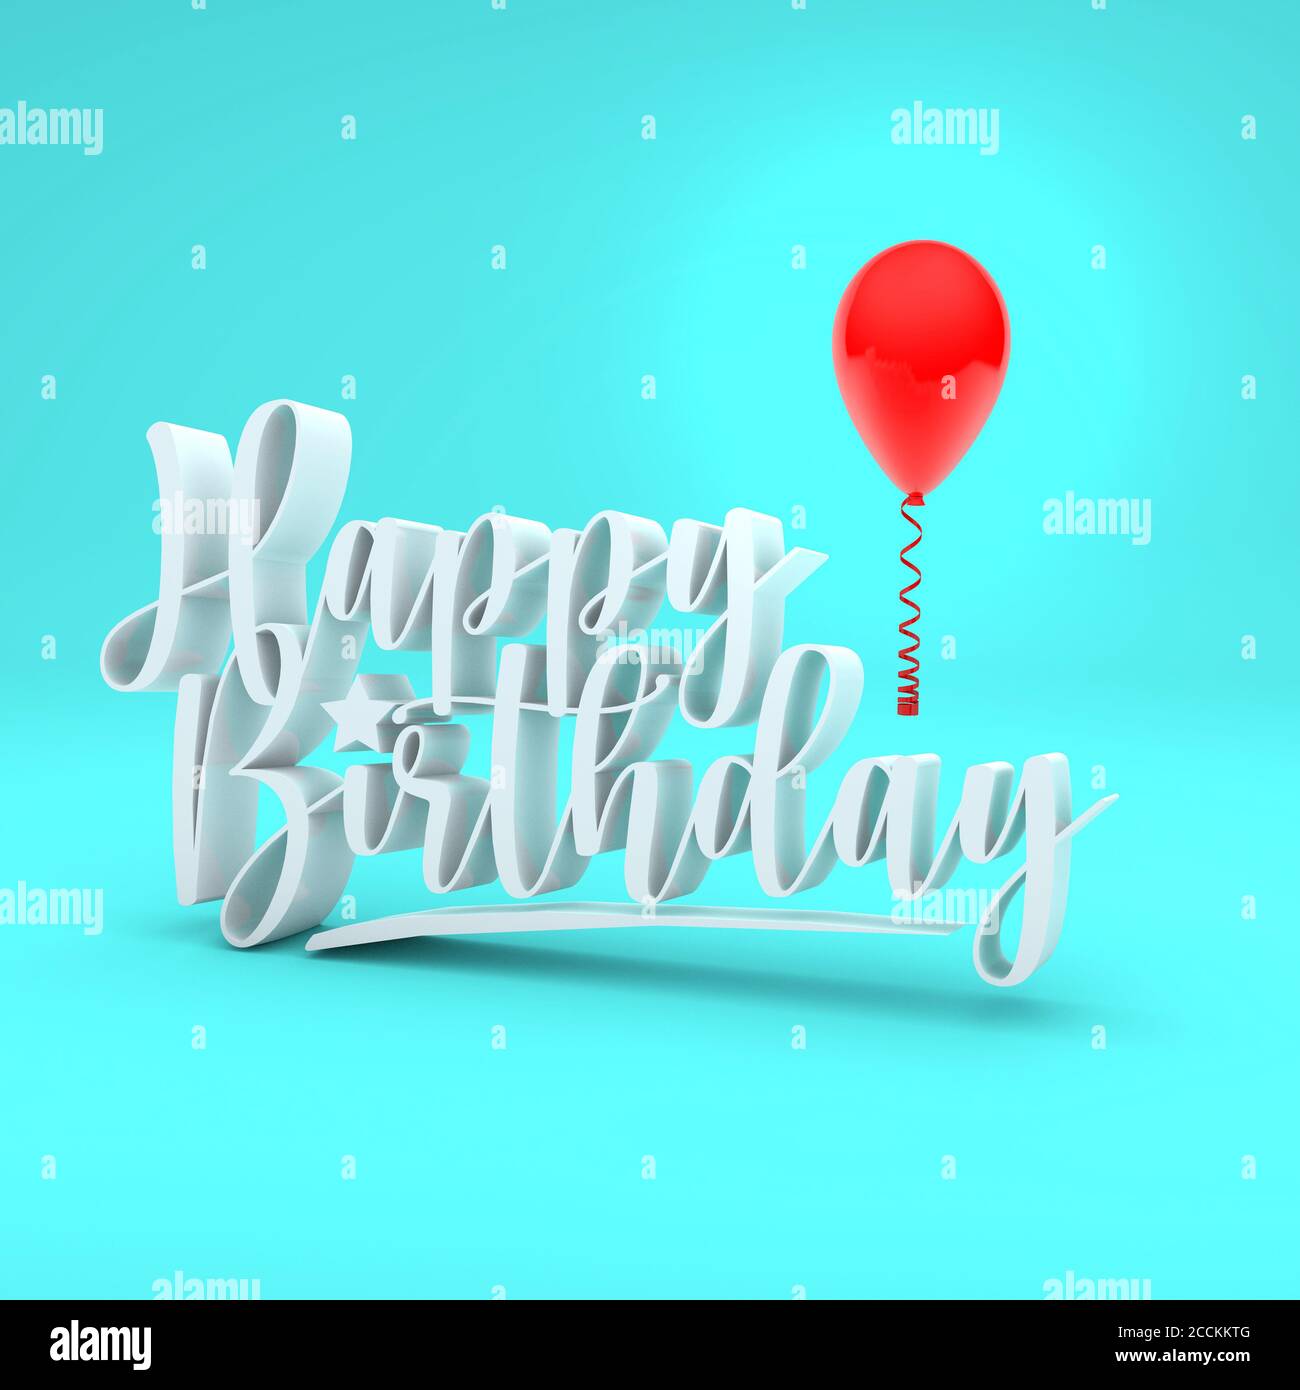 3d illustration render concept of a happy birthday papercut on a white background Stock Photo